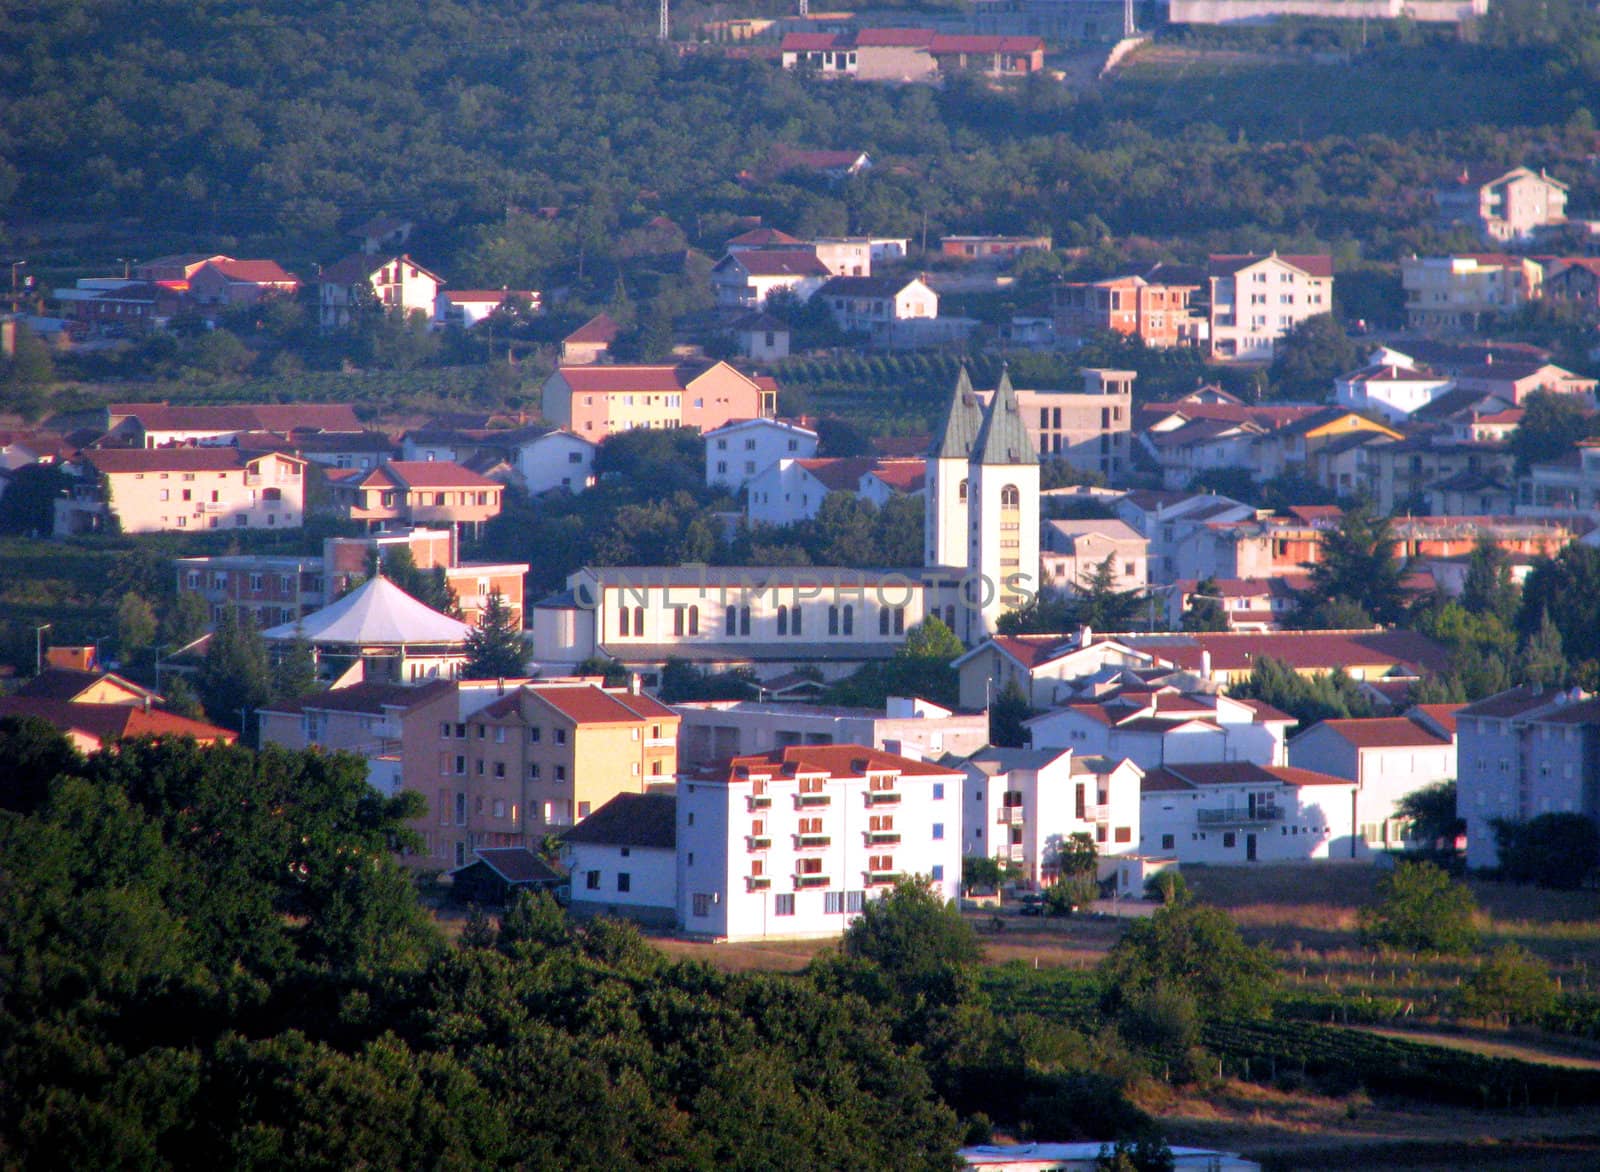 The city of Medjugorje with Saint James church in its centre in Bosnia - Herzegovina.